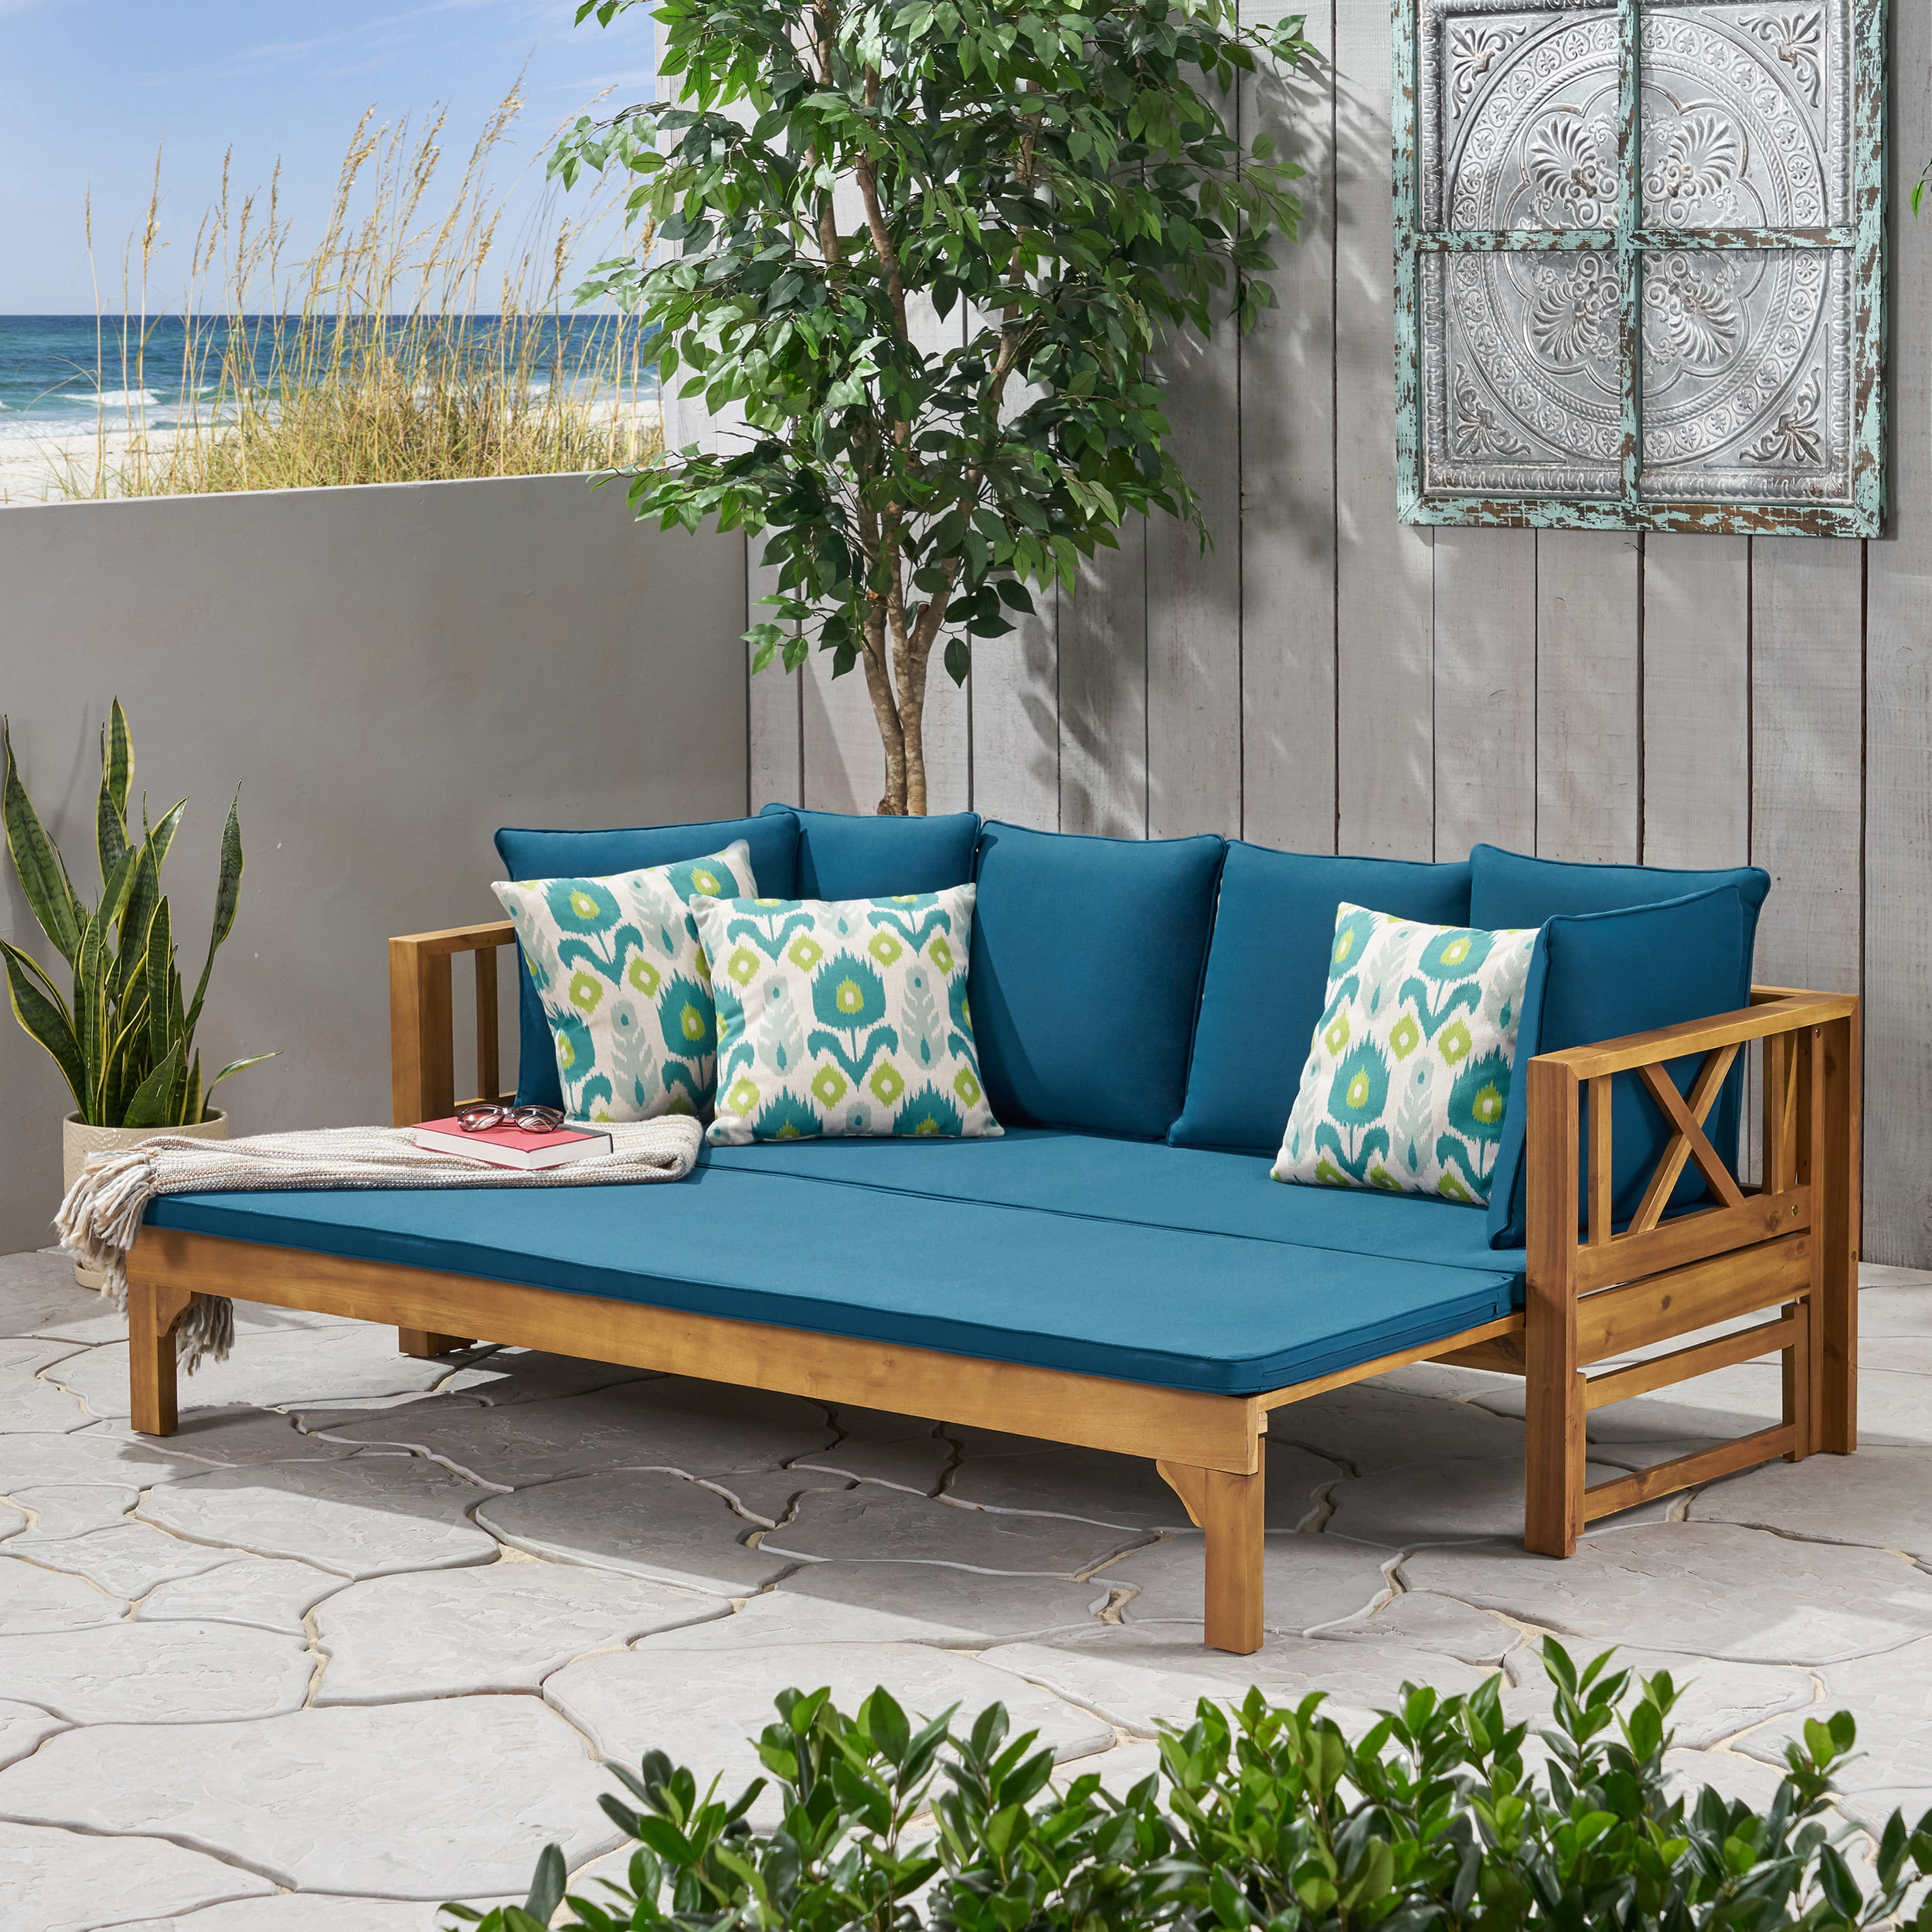 Camille Acacia Extendable Studio Outdoor Daybed Dark and Teak Teal Sofa, GDF Wood